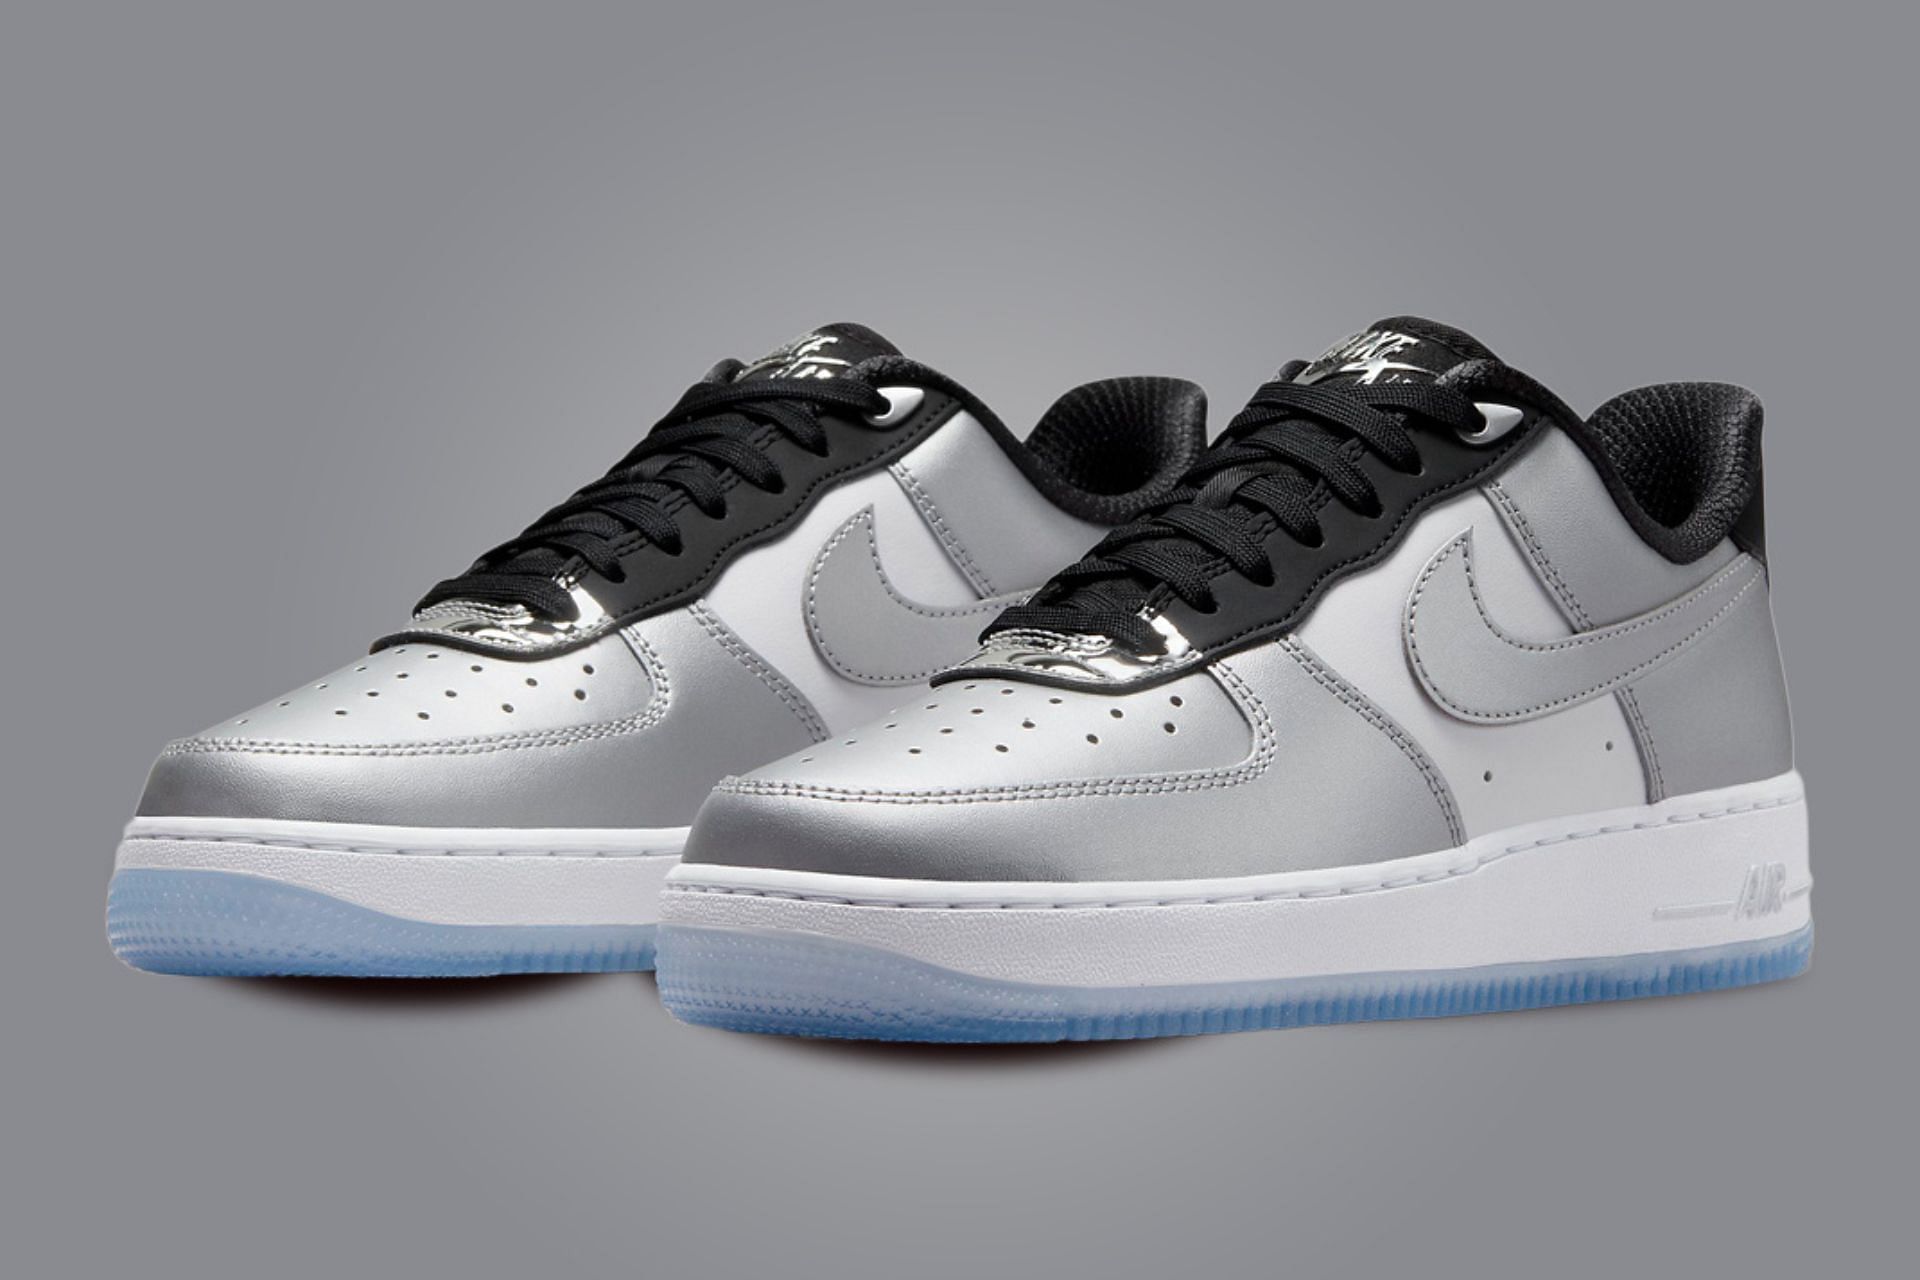 Nike Air Force 1 Low White Red Black (Icy Soles)Nike Air Force 1 Low White  Red Black (Icy Soles) - OFour